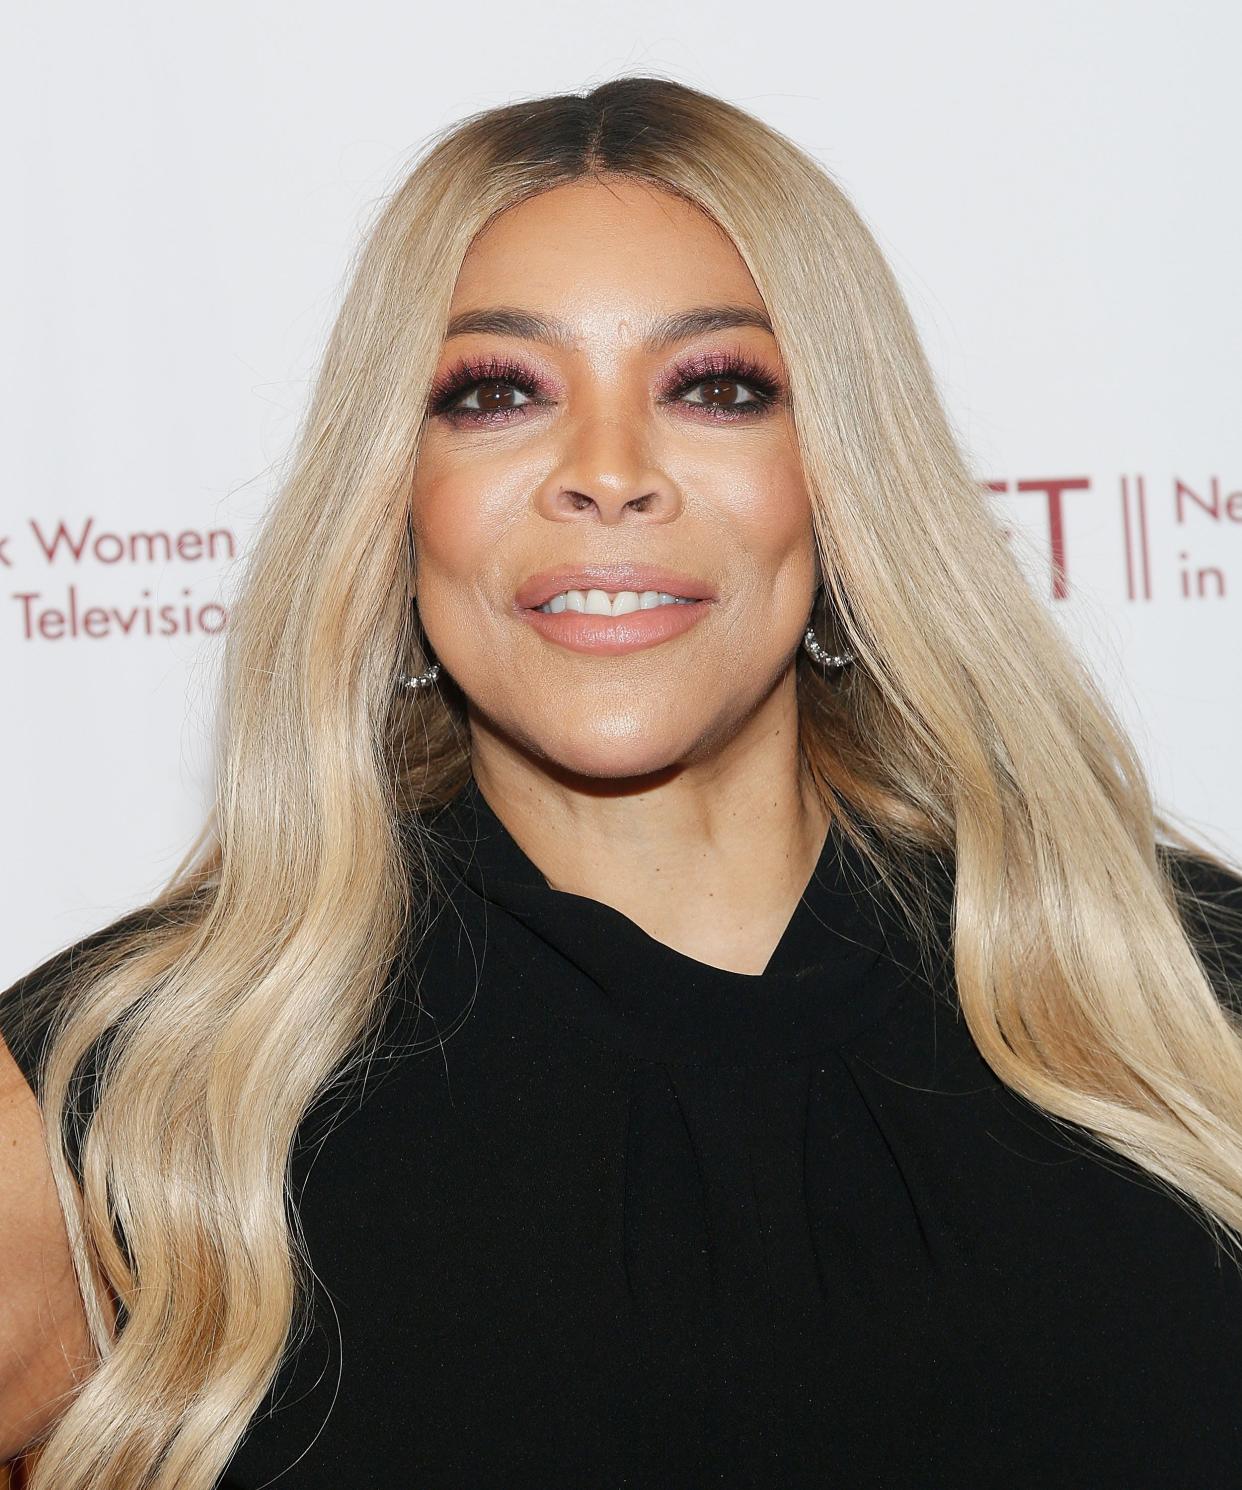 Wendy Williams attends the 2019 NYWIFT Muse Awards at the New York Hilton Midtown on Dec. 10, 2019 in New York City.